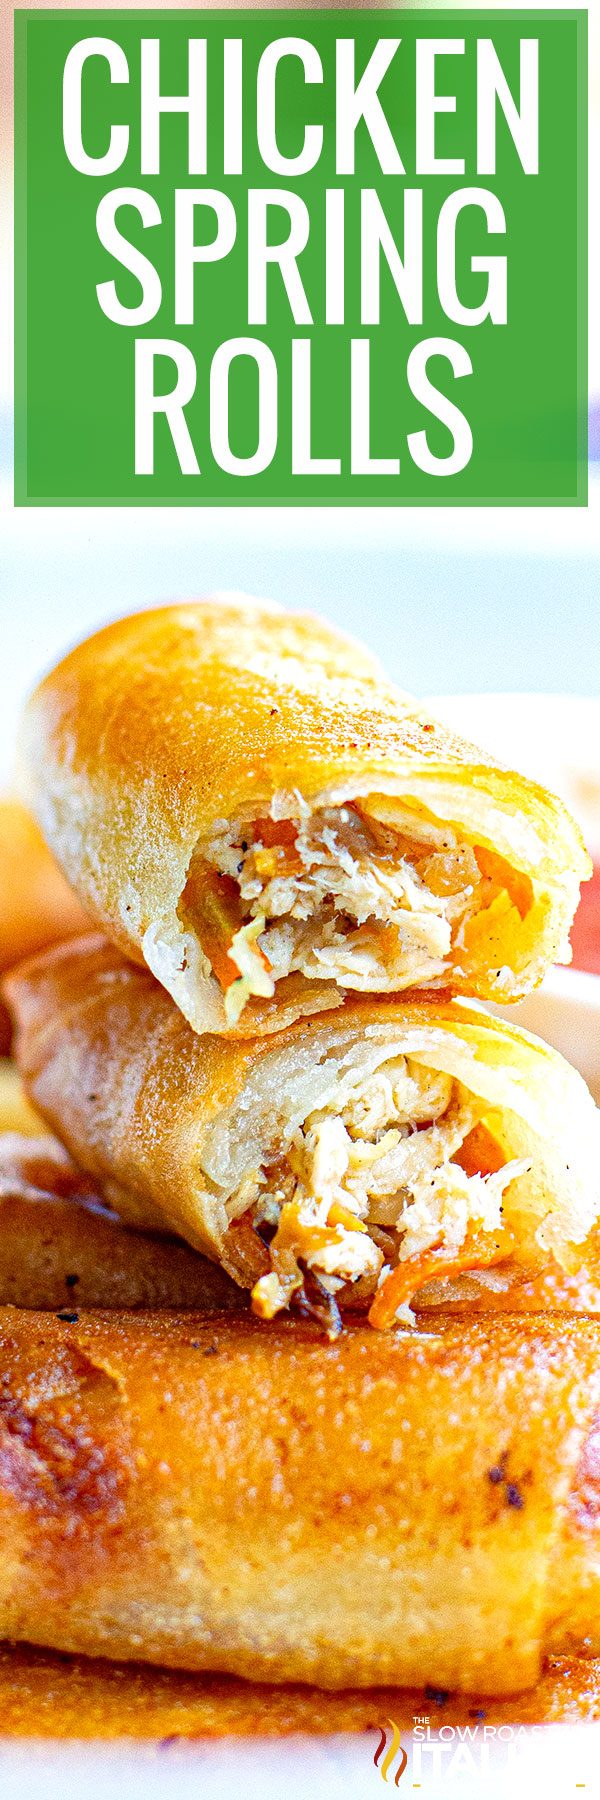 titled image (and shown): Chicken Spring Rolls